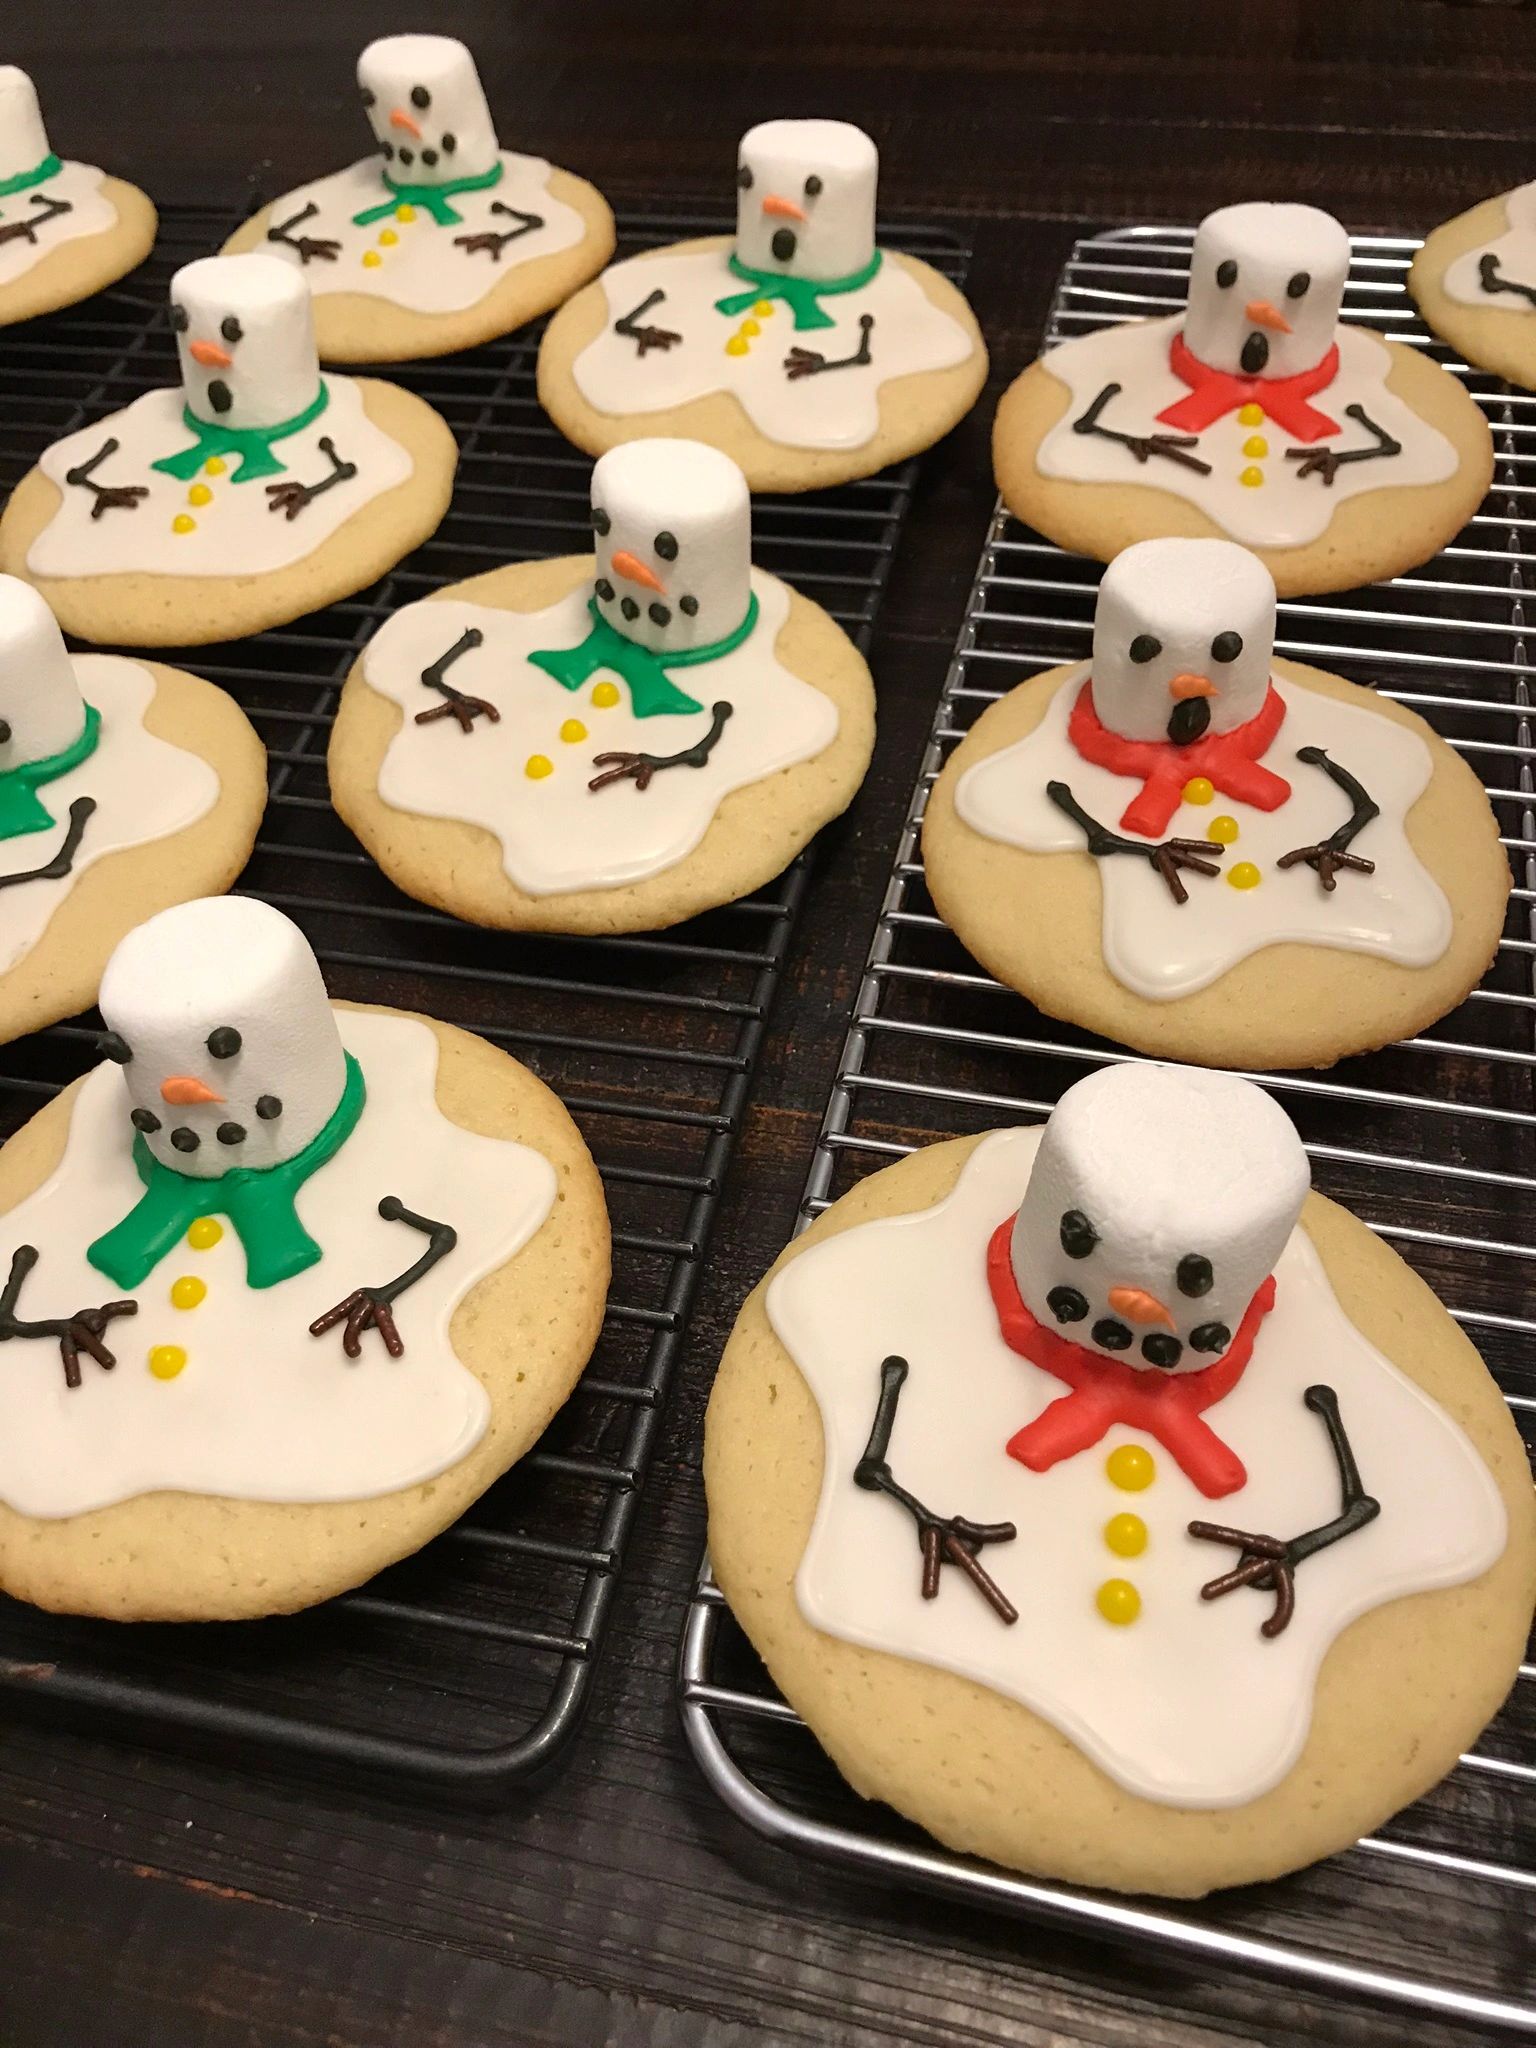 Poor Snowman melted in the Tennessee heat - large selection of decorated cookies for all events, kid